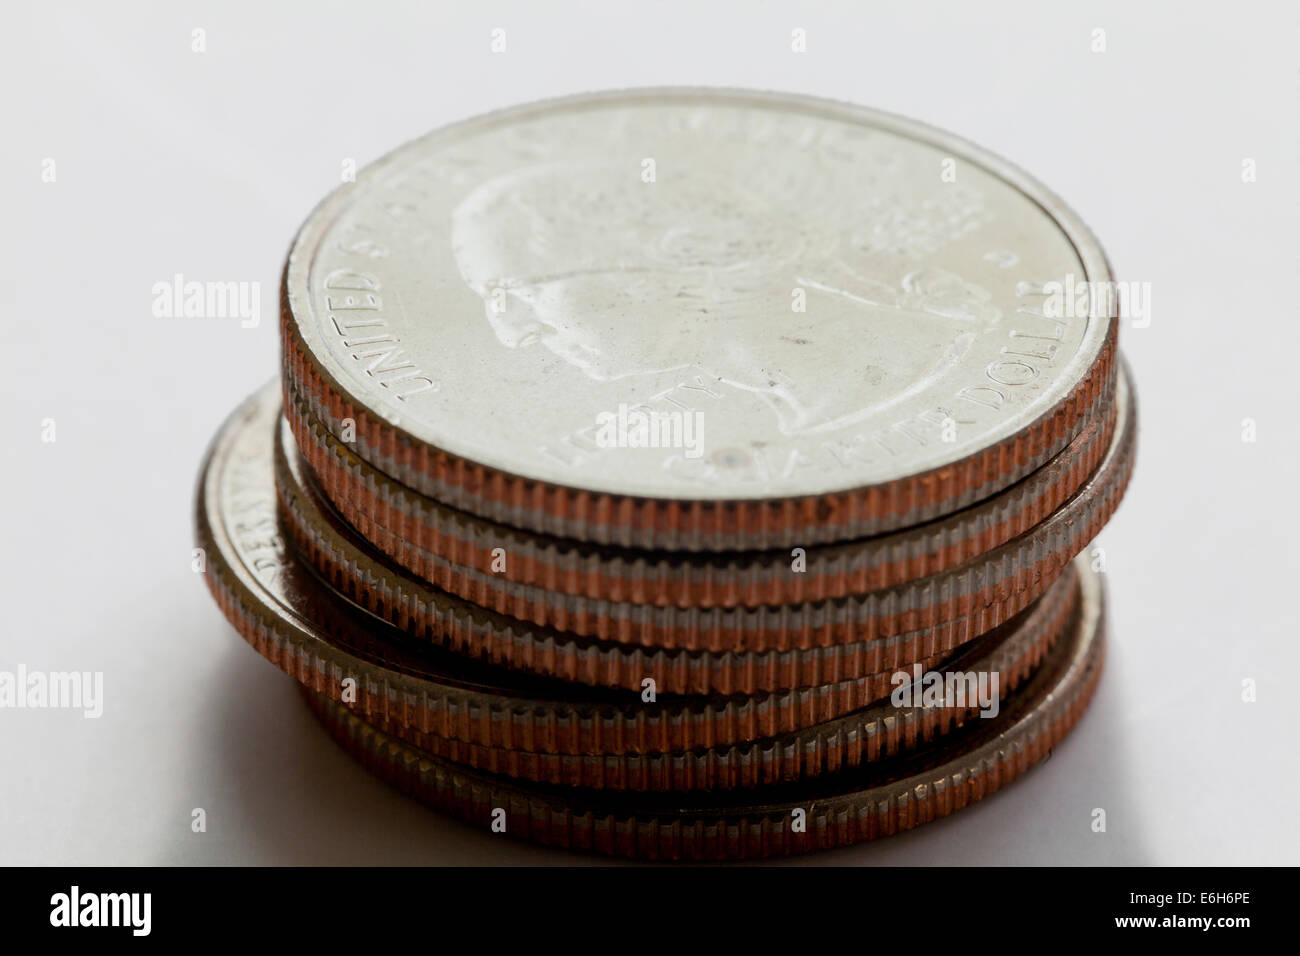 US quarter dollar coins stacked Stock Photo